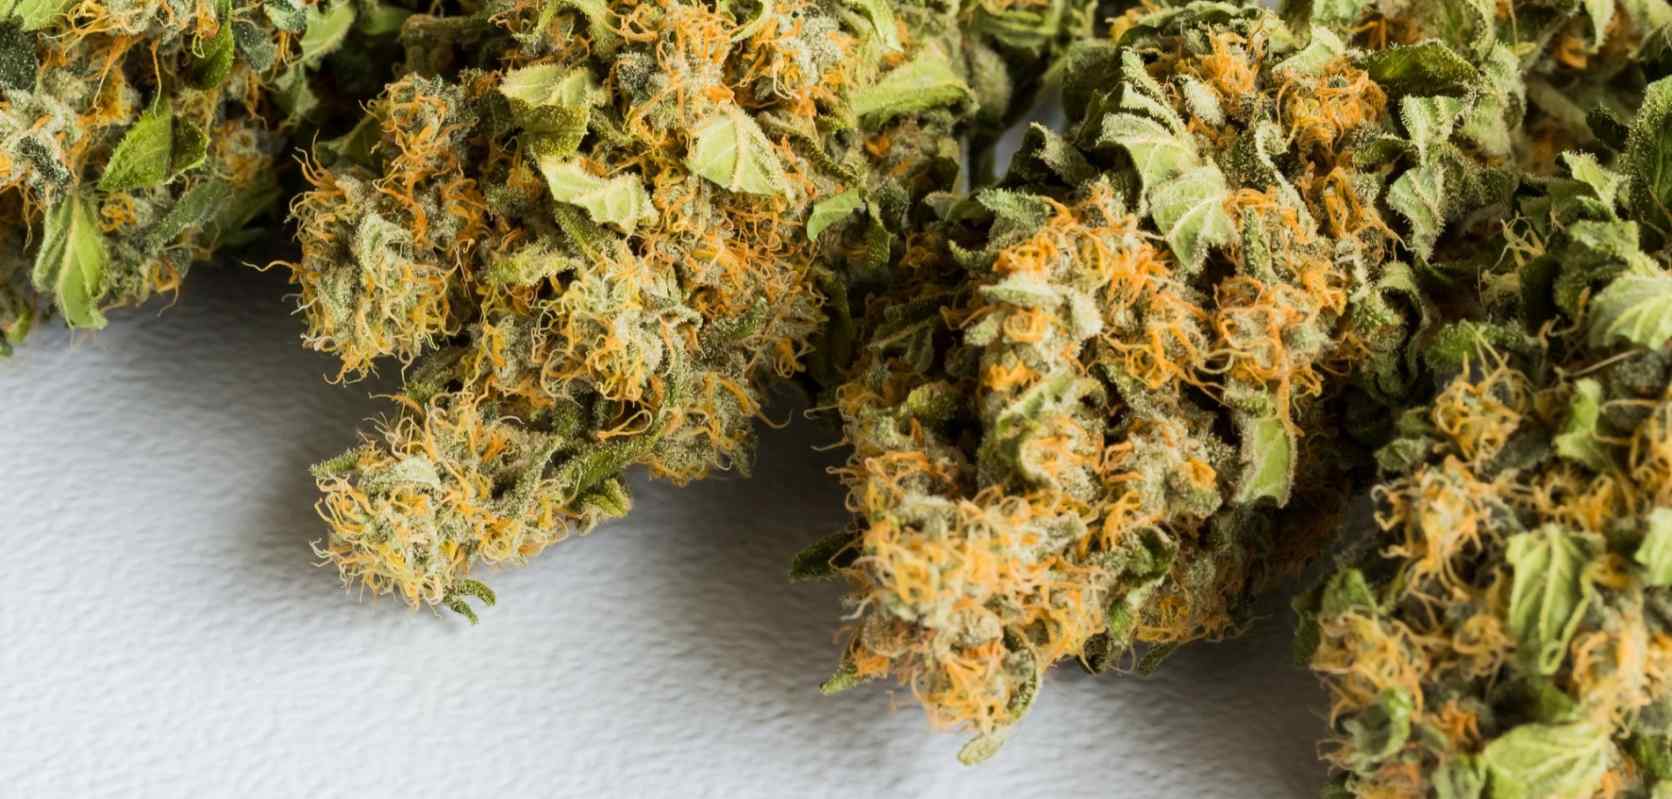 Indica, on the other hand, comes from Cannabis Indica and is native to Turkey, Pakistan, India, and Afghanistan. The plant is often described as stocky and short with chunky leaves. 